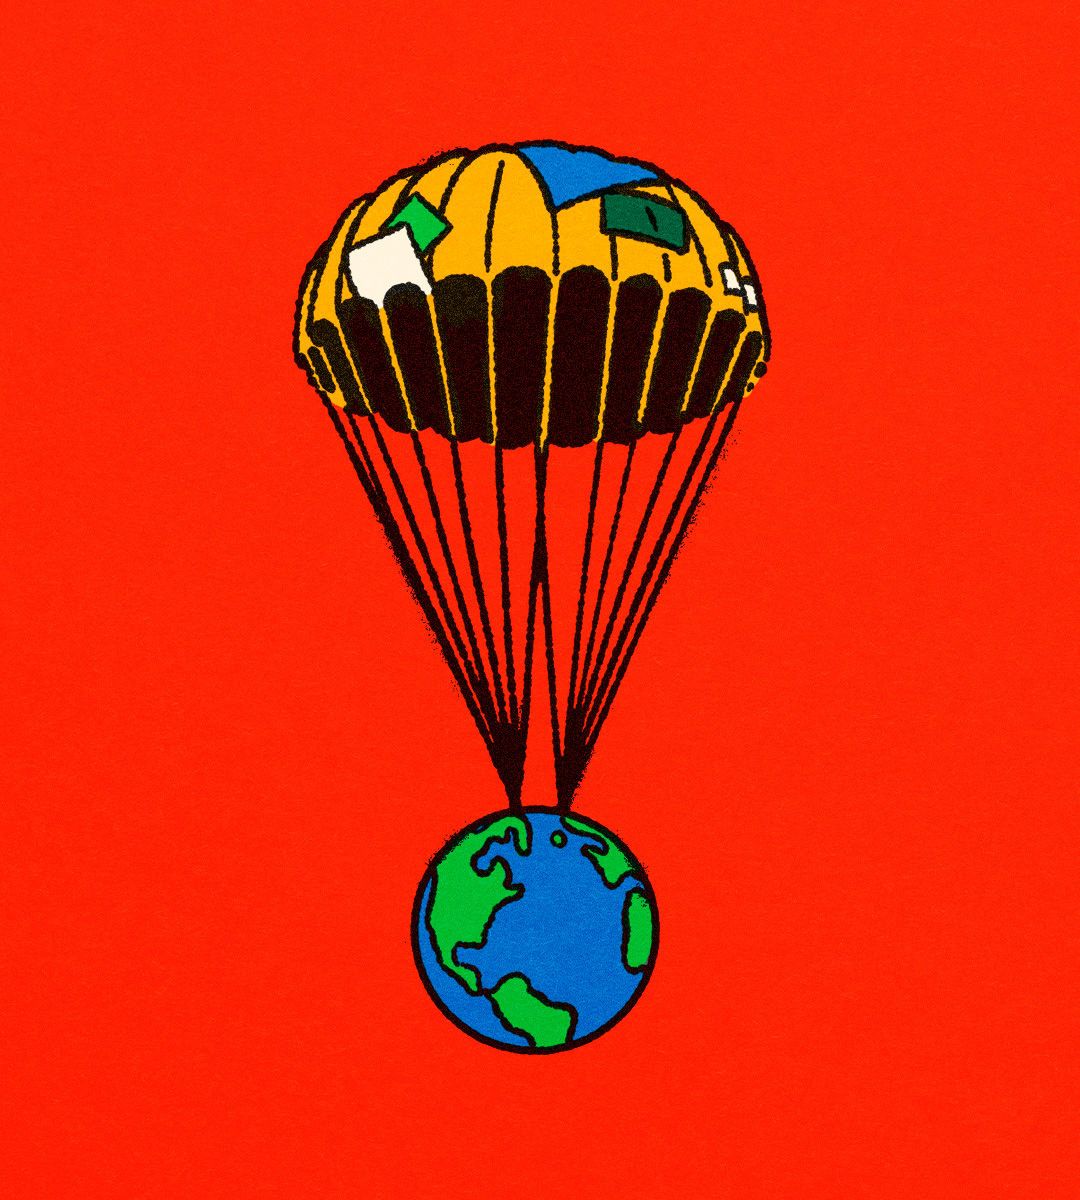 A globe being carried by a patched up parachute.